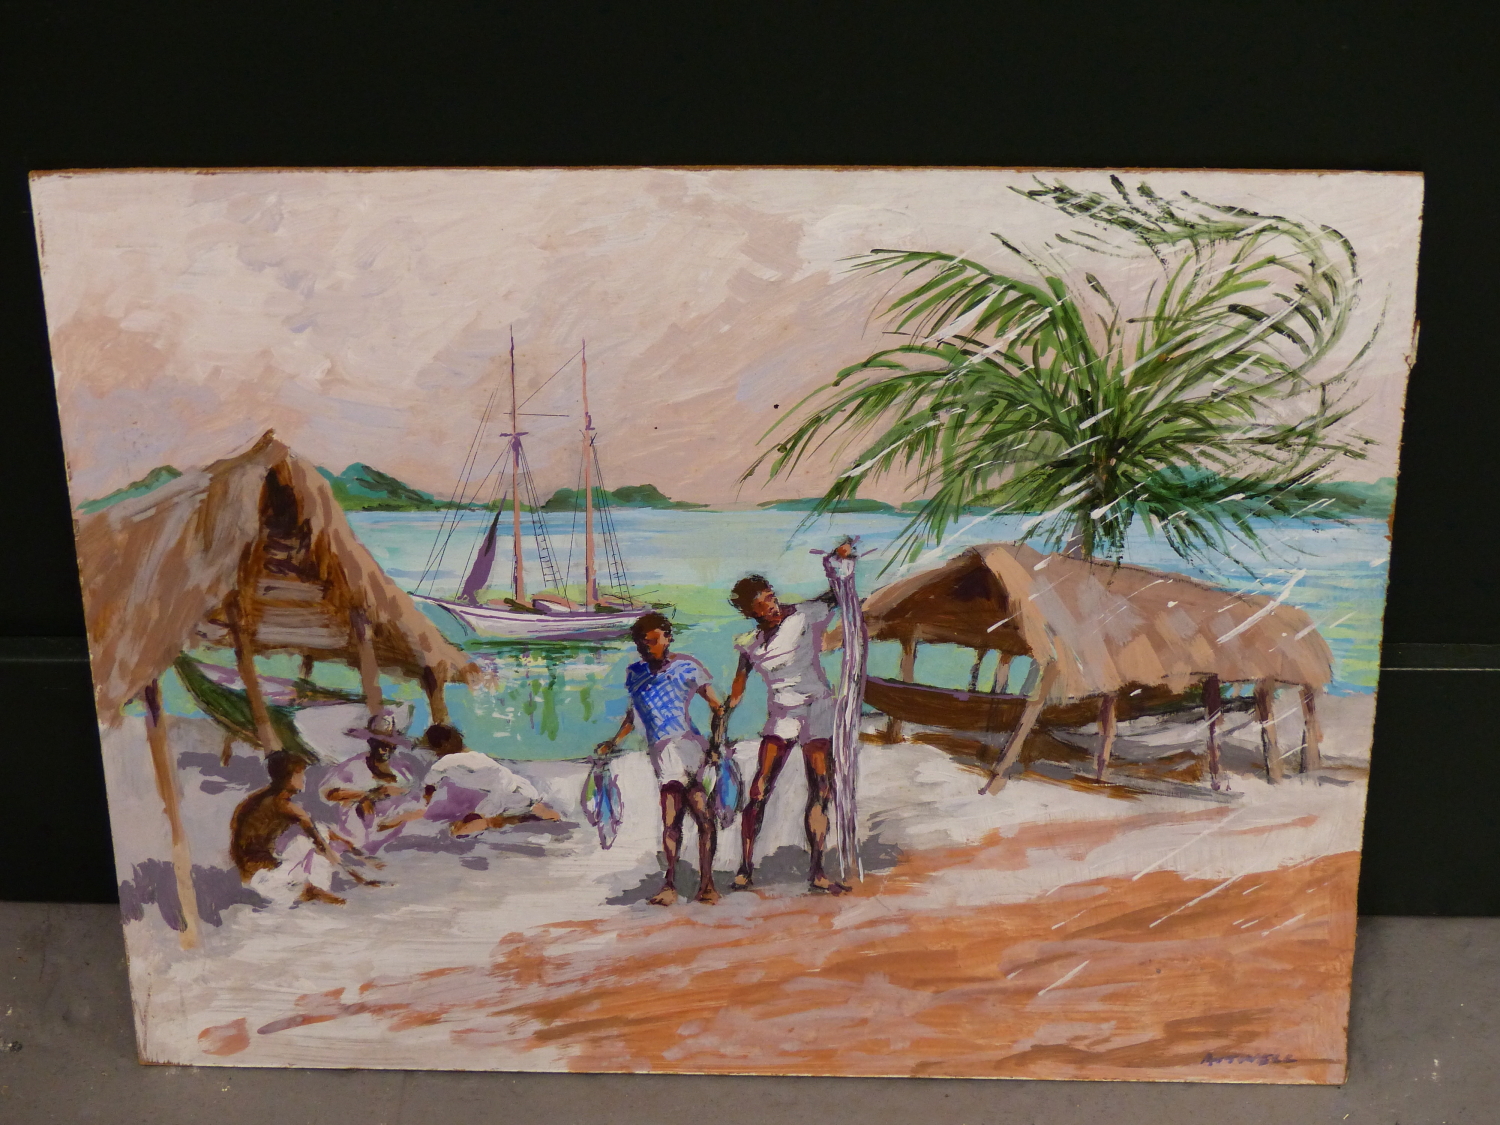 IVY T. ATTWELL (1895-1985) ARR. STUDY OF BOYS ON A BEACH WITH GRASS ROOF HUTS,SIGNED LOWER RIGHT, OI - Image 2 of 6